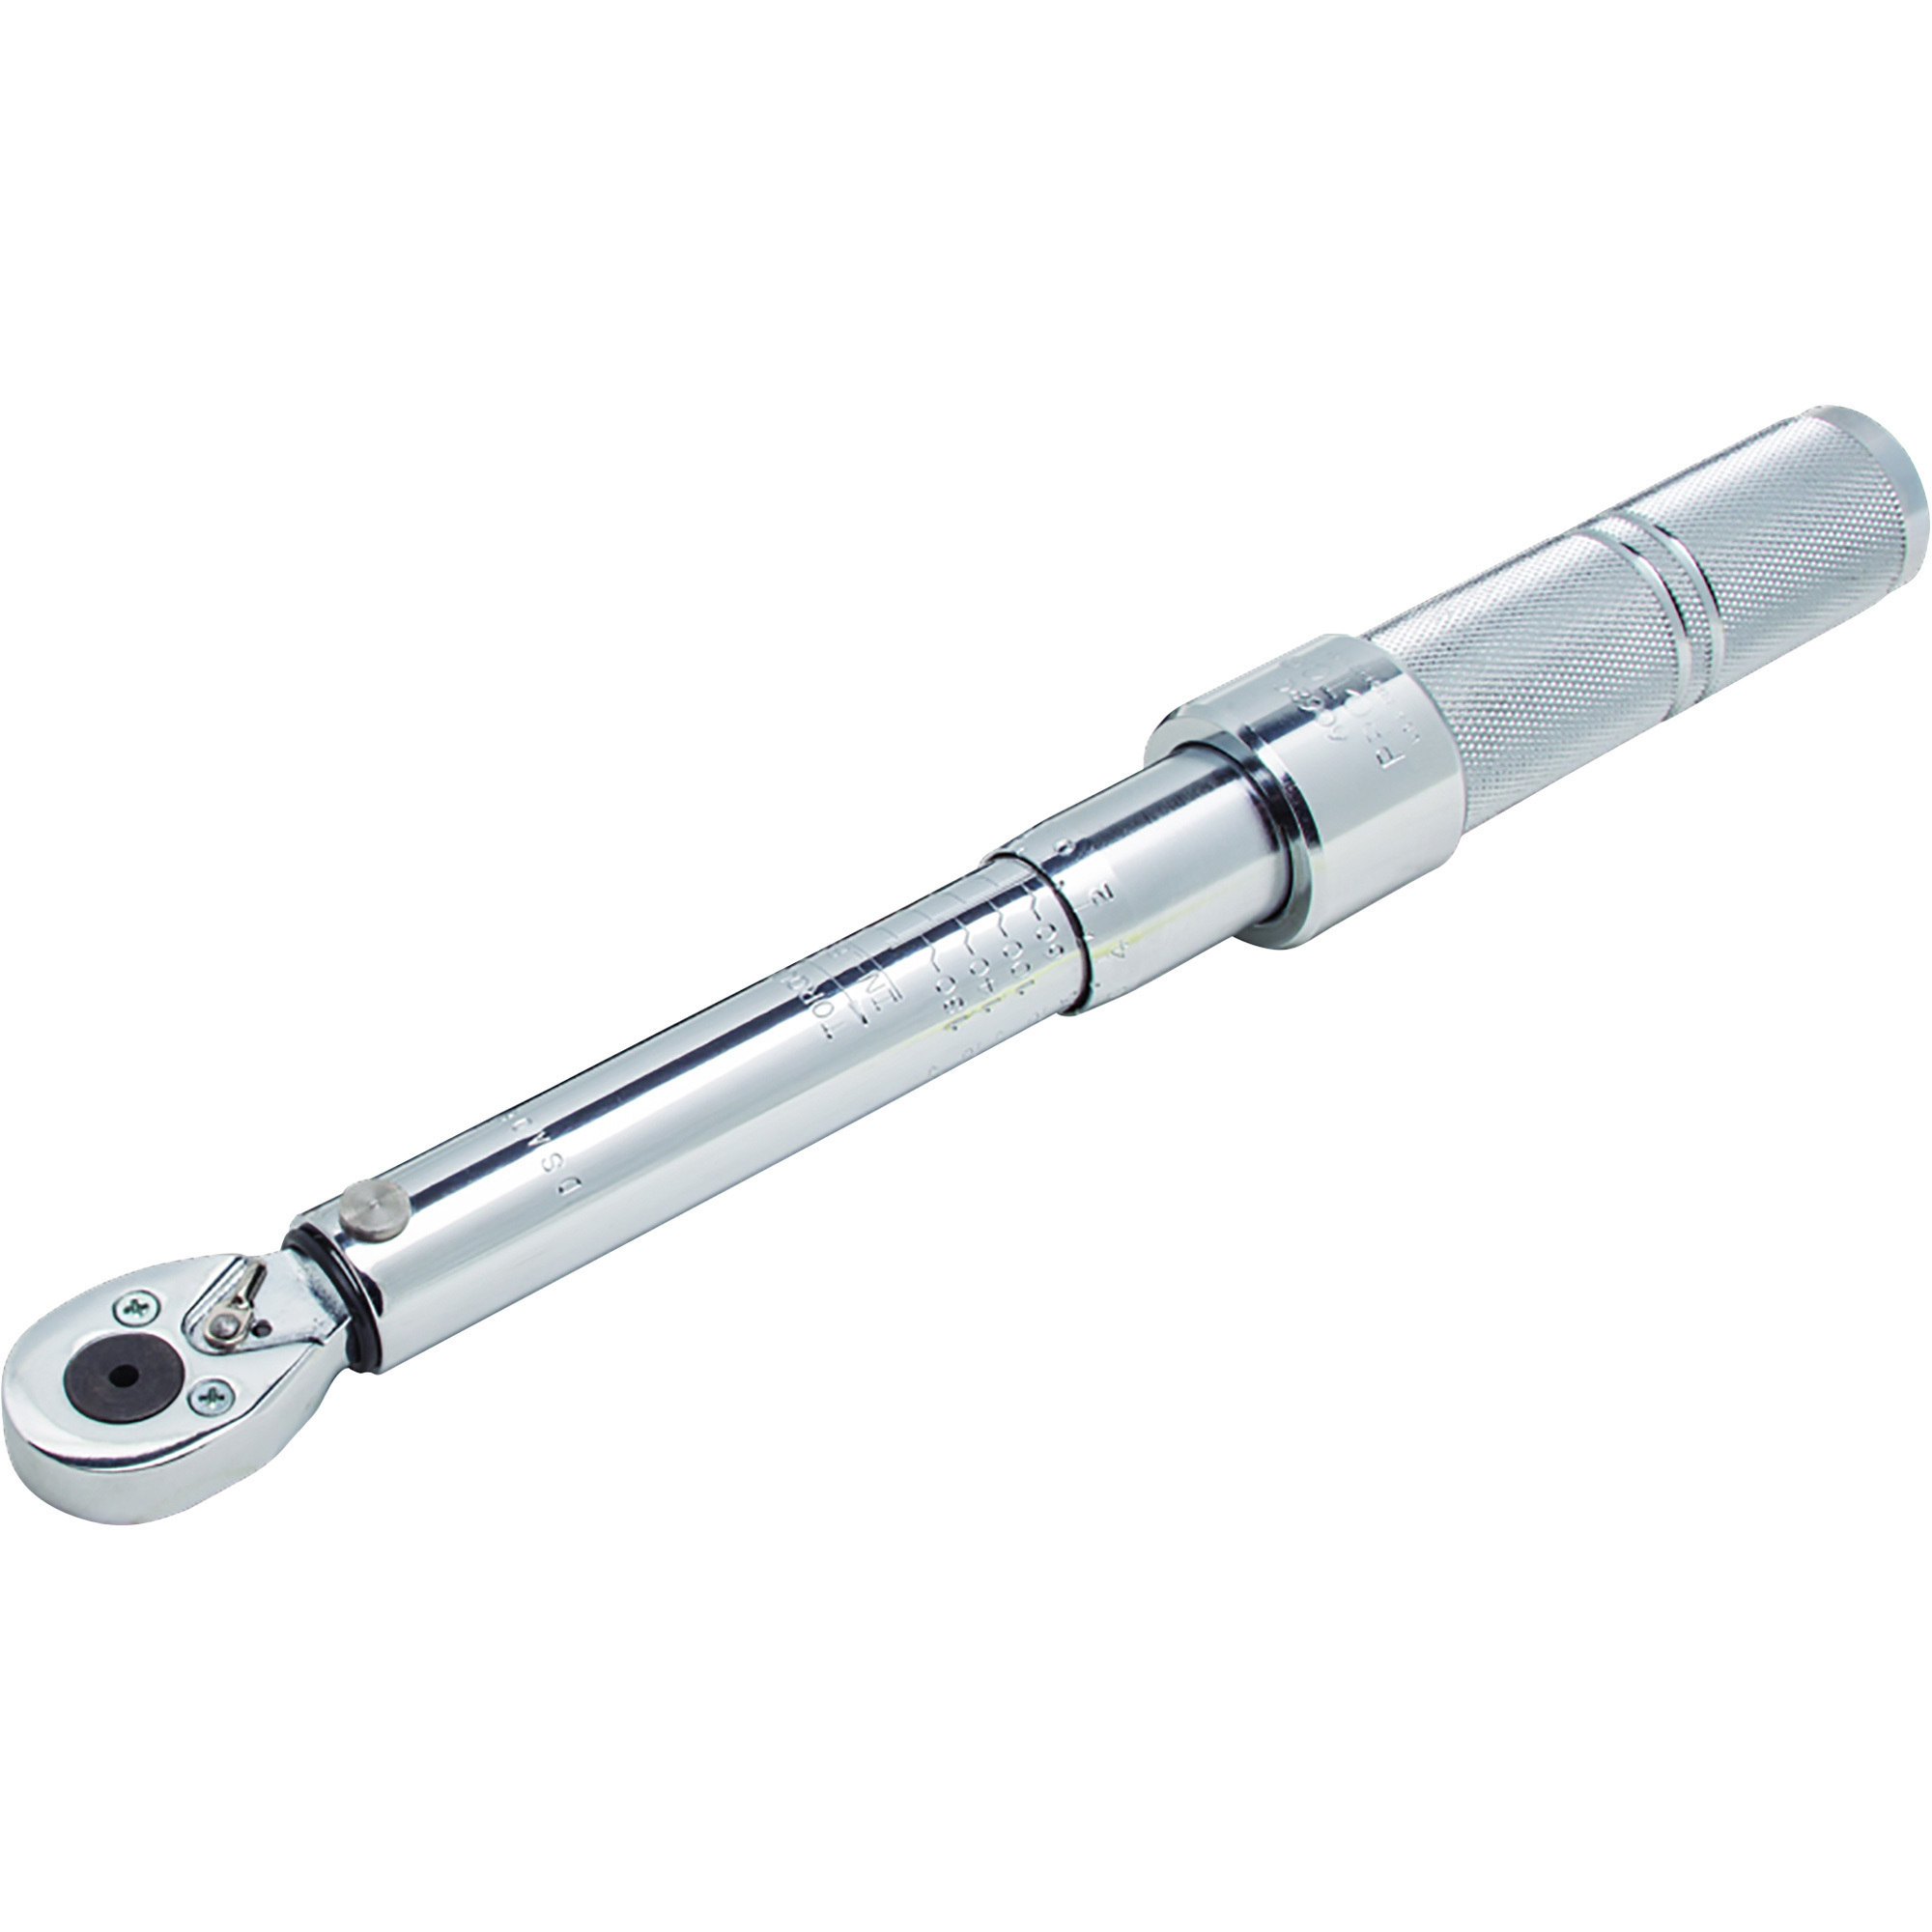 Proto Ratcheting Head Micrometer Torque Wrench, 1/4Inch Drive, 40-200 Inch-Lbs., Model J6062C